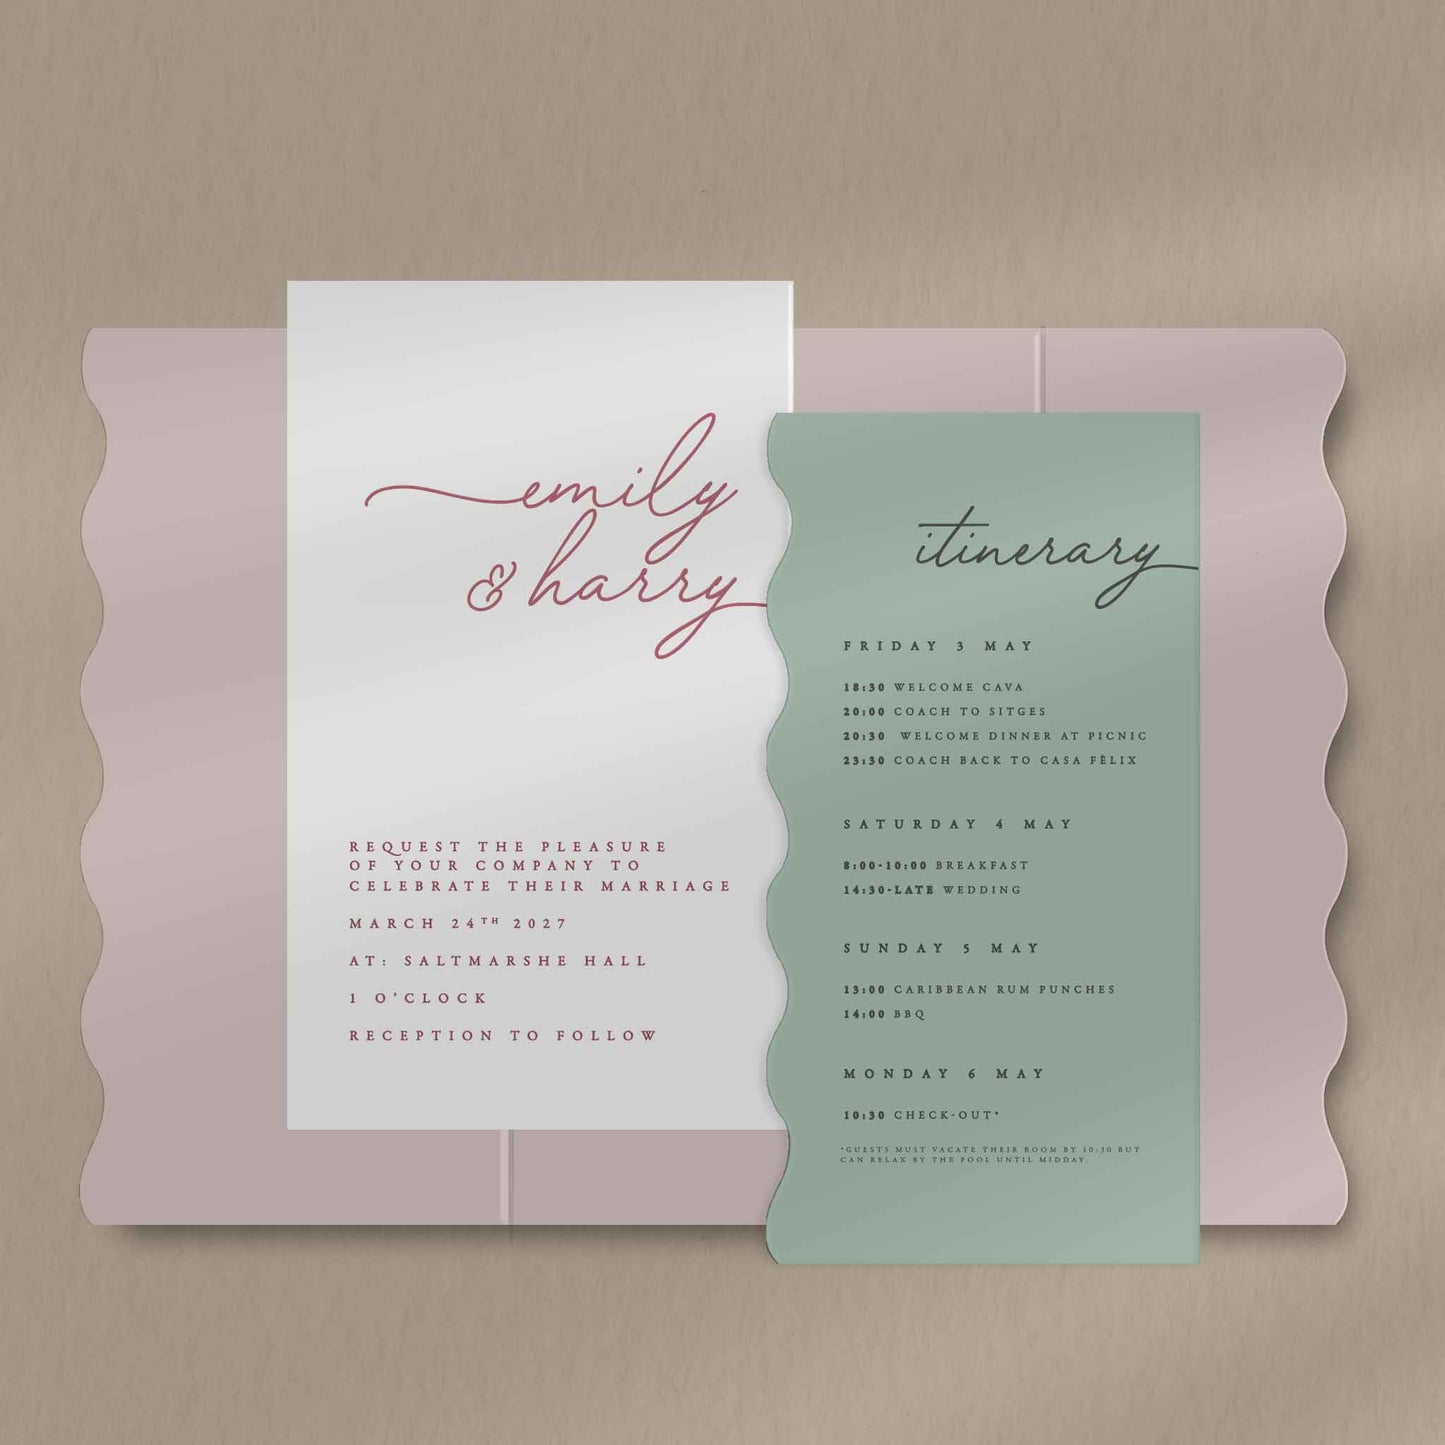 Scallop Envelope Sample  Ivy and Gold Wedding Stationery Emily  